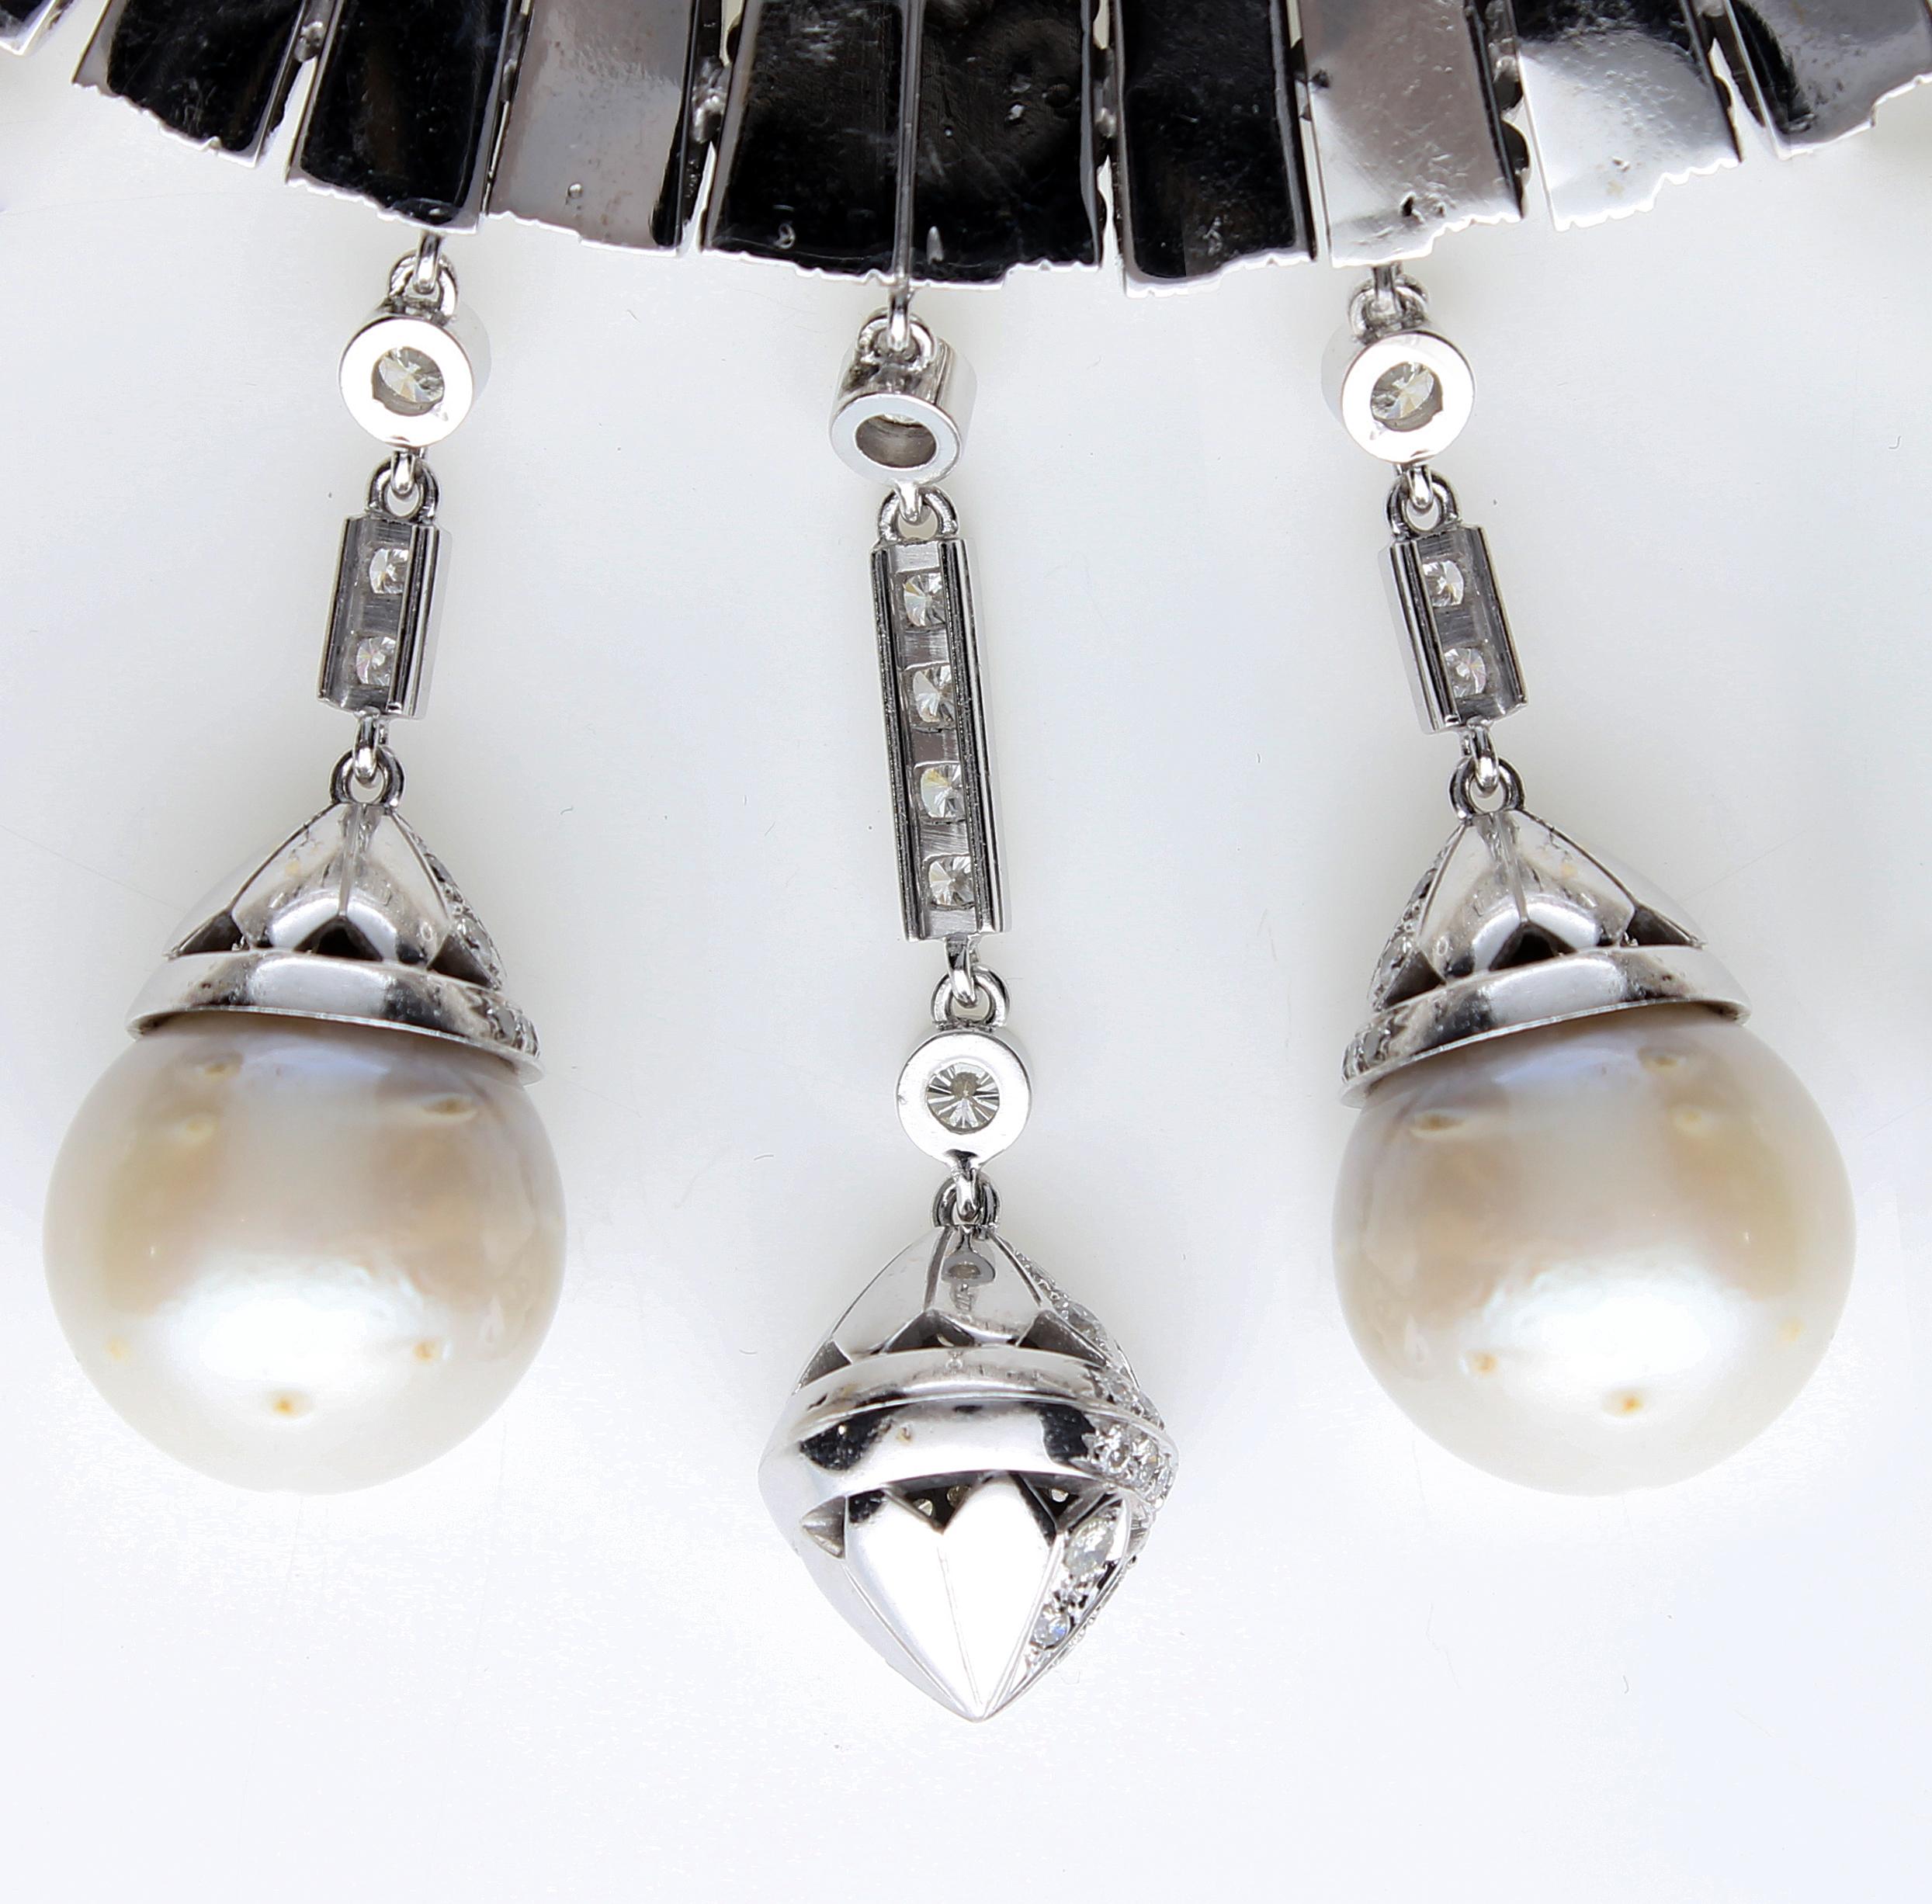 Necklace White Gold and Diamonds, Pendants with White and Black Pearls S.S. For Sale 13